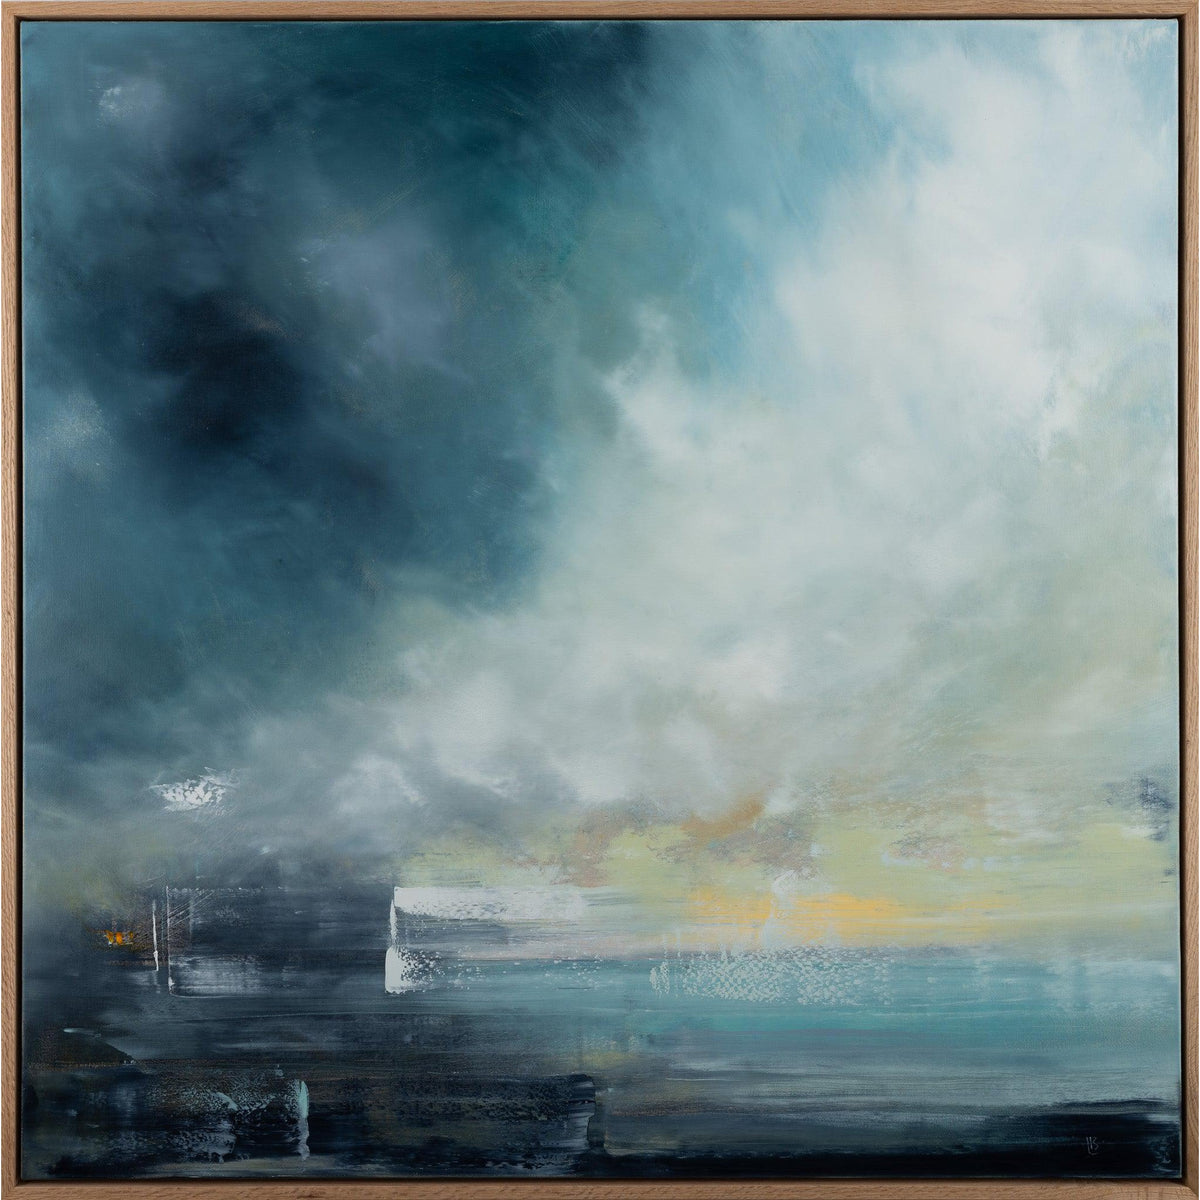 &#39;Spring Tide/Rushing Out&#39; oil on linen by Ben Lucas, available at Padstow Gallery, Cornwall